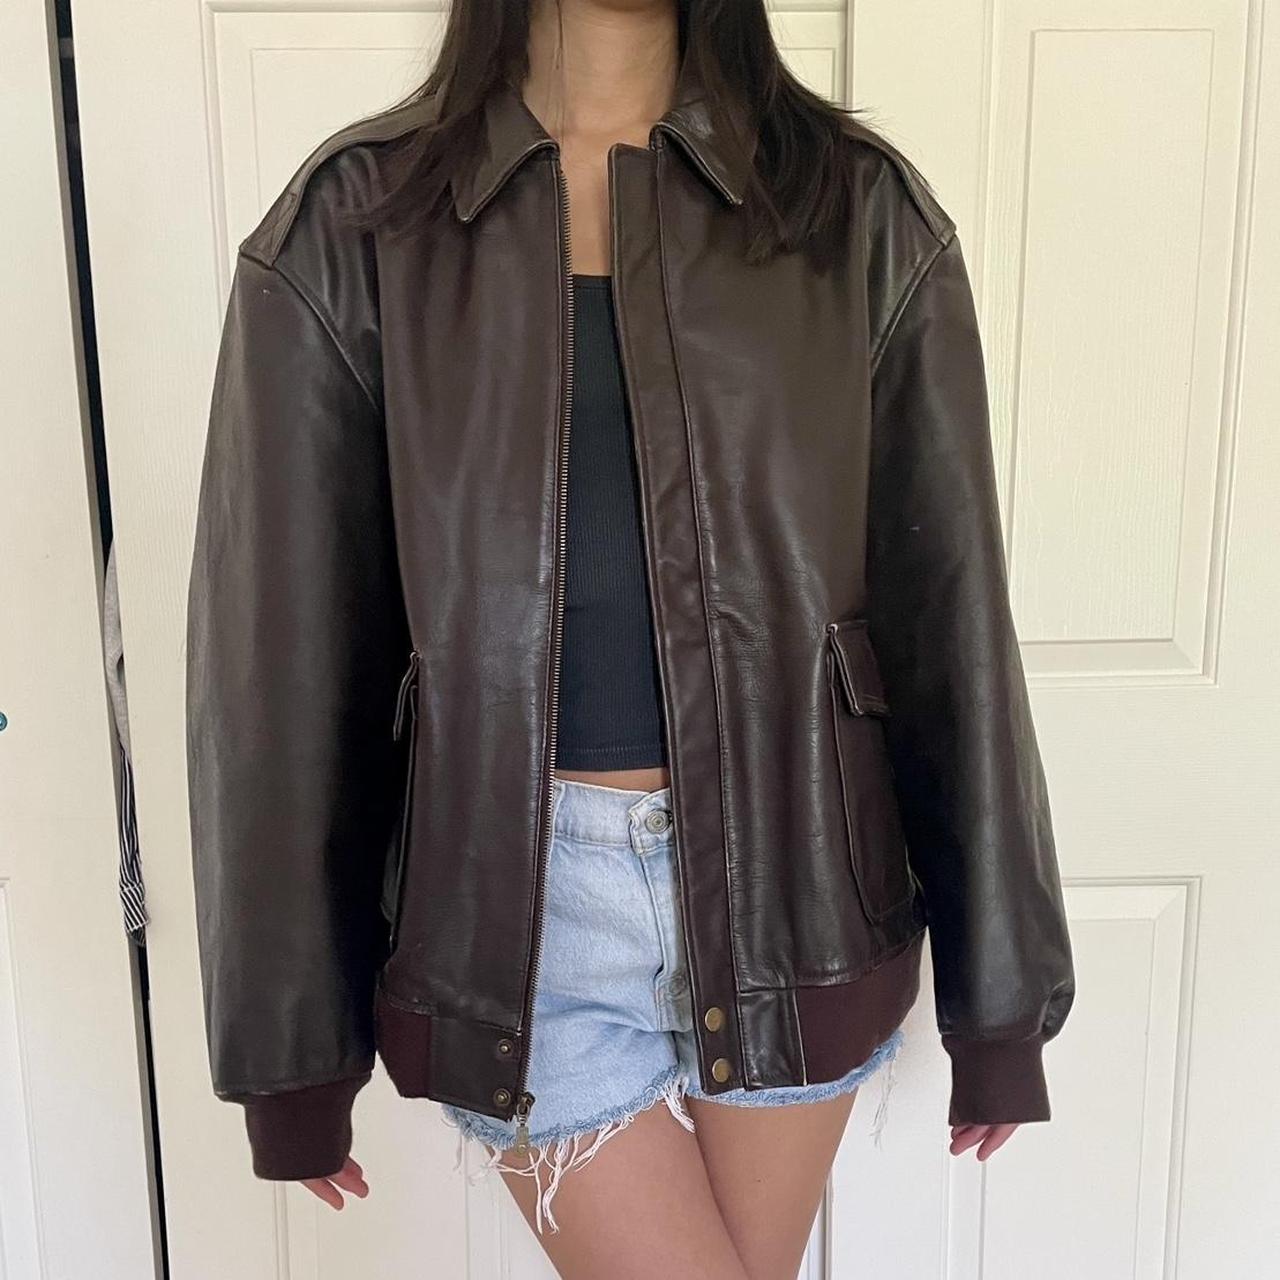 Rothco Vintage Leather Bomber Jacket Perfect... - Depop